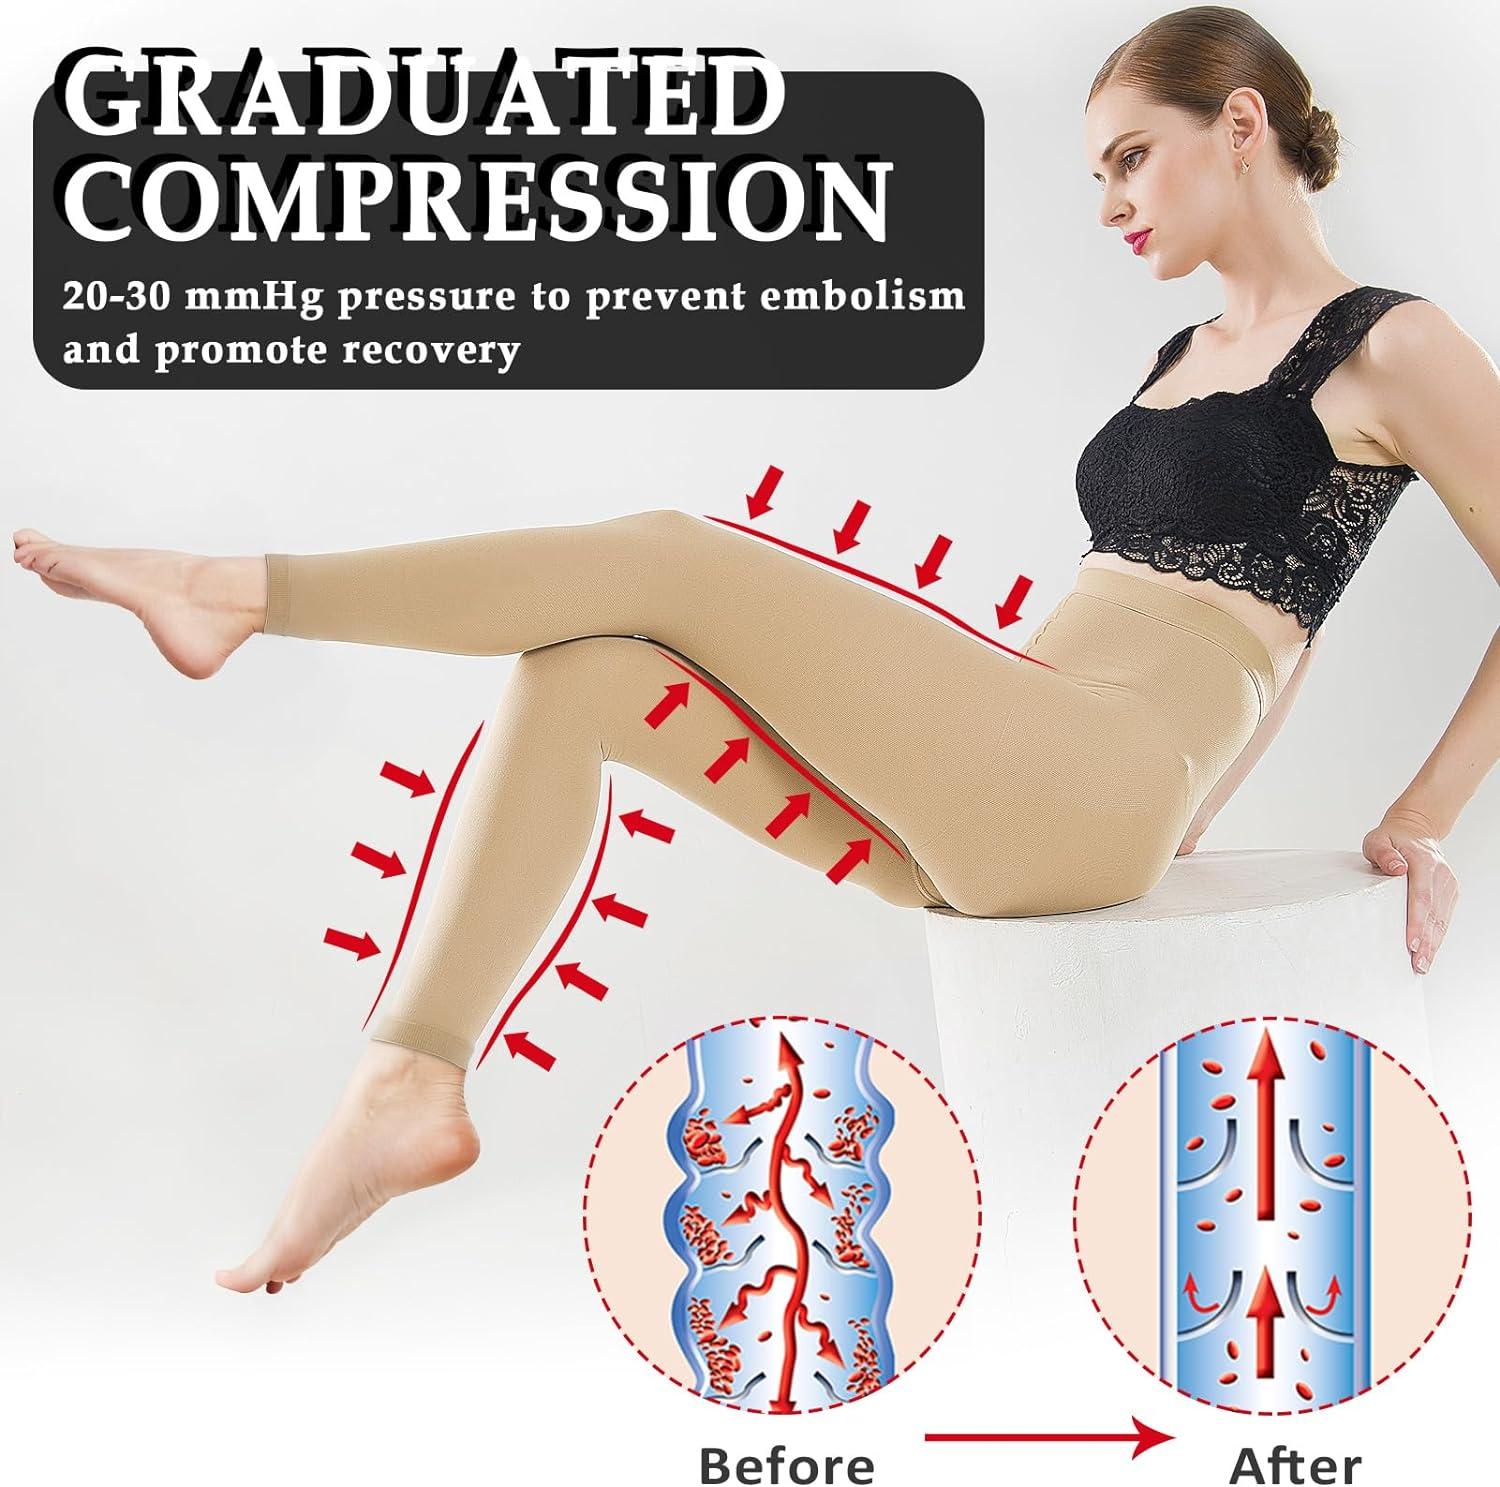 Ailaka Compression Pantyhose for Men Women Firm Graduated Support